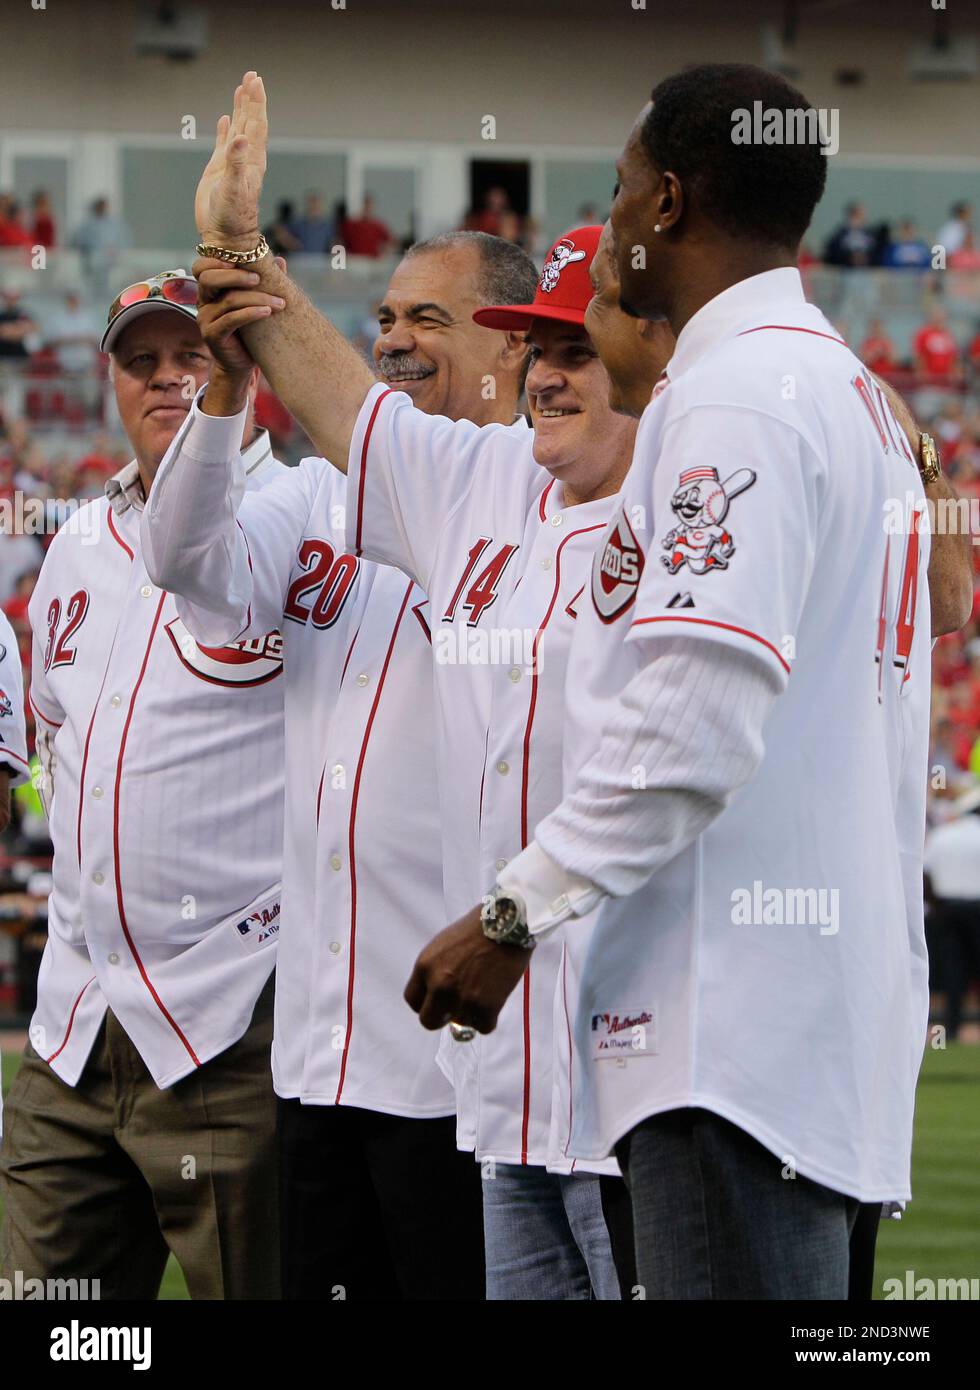 Former Cincinnati Reds great Pete Rose (14) meets with former teammates,  left to right, Tom Browning, Cesar Geronimo, Tony Perez, and Eric Davis,  during ceremonies celebrating the 25th anniversary of Rose breaking